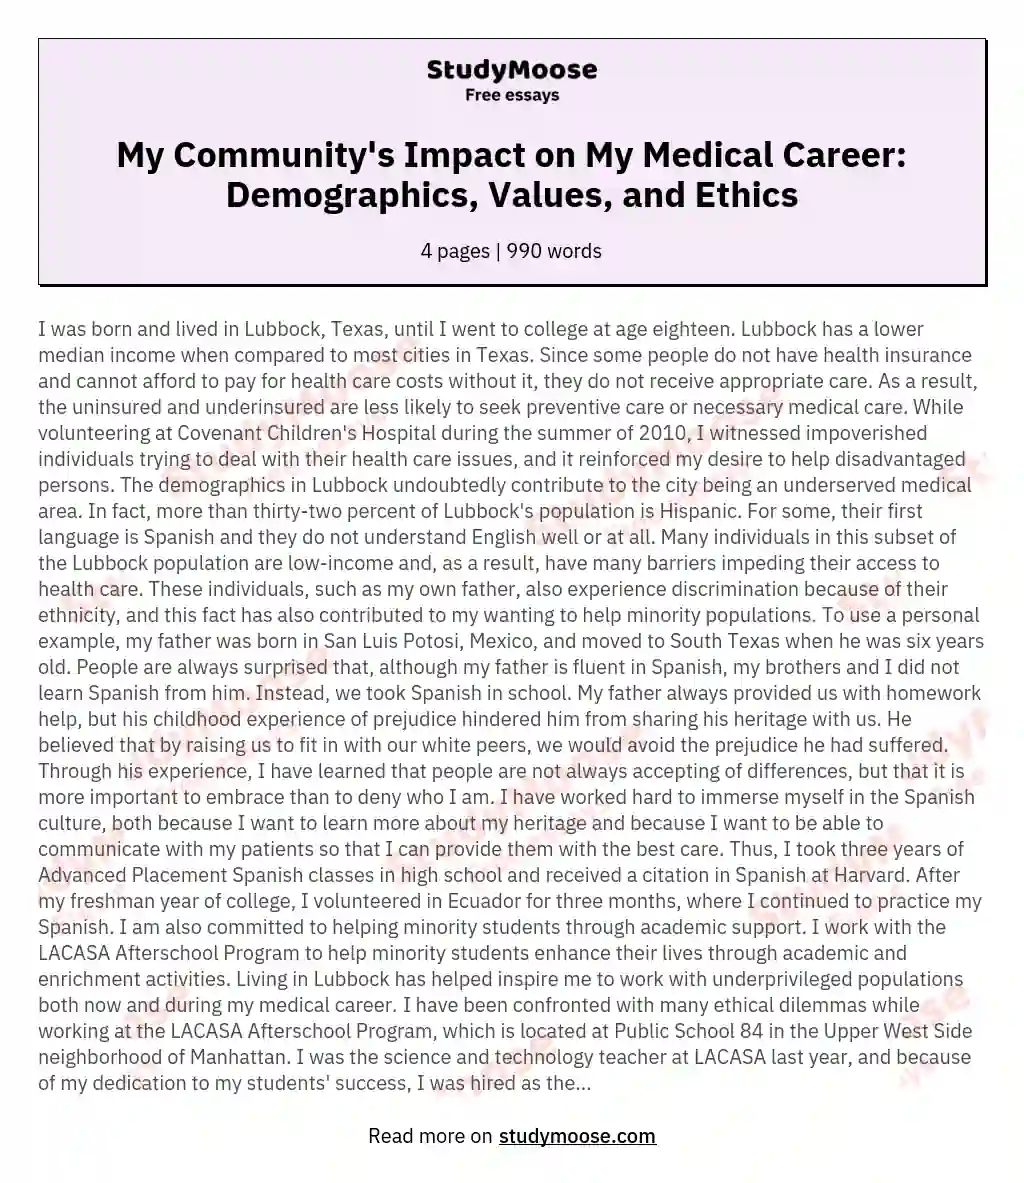 My Community's Impact on My Medical Career: Demographics, Values, and Ethics essay